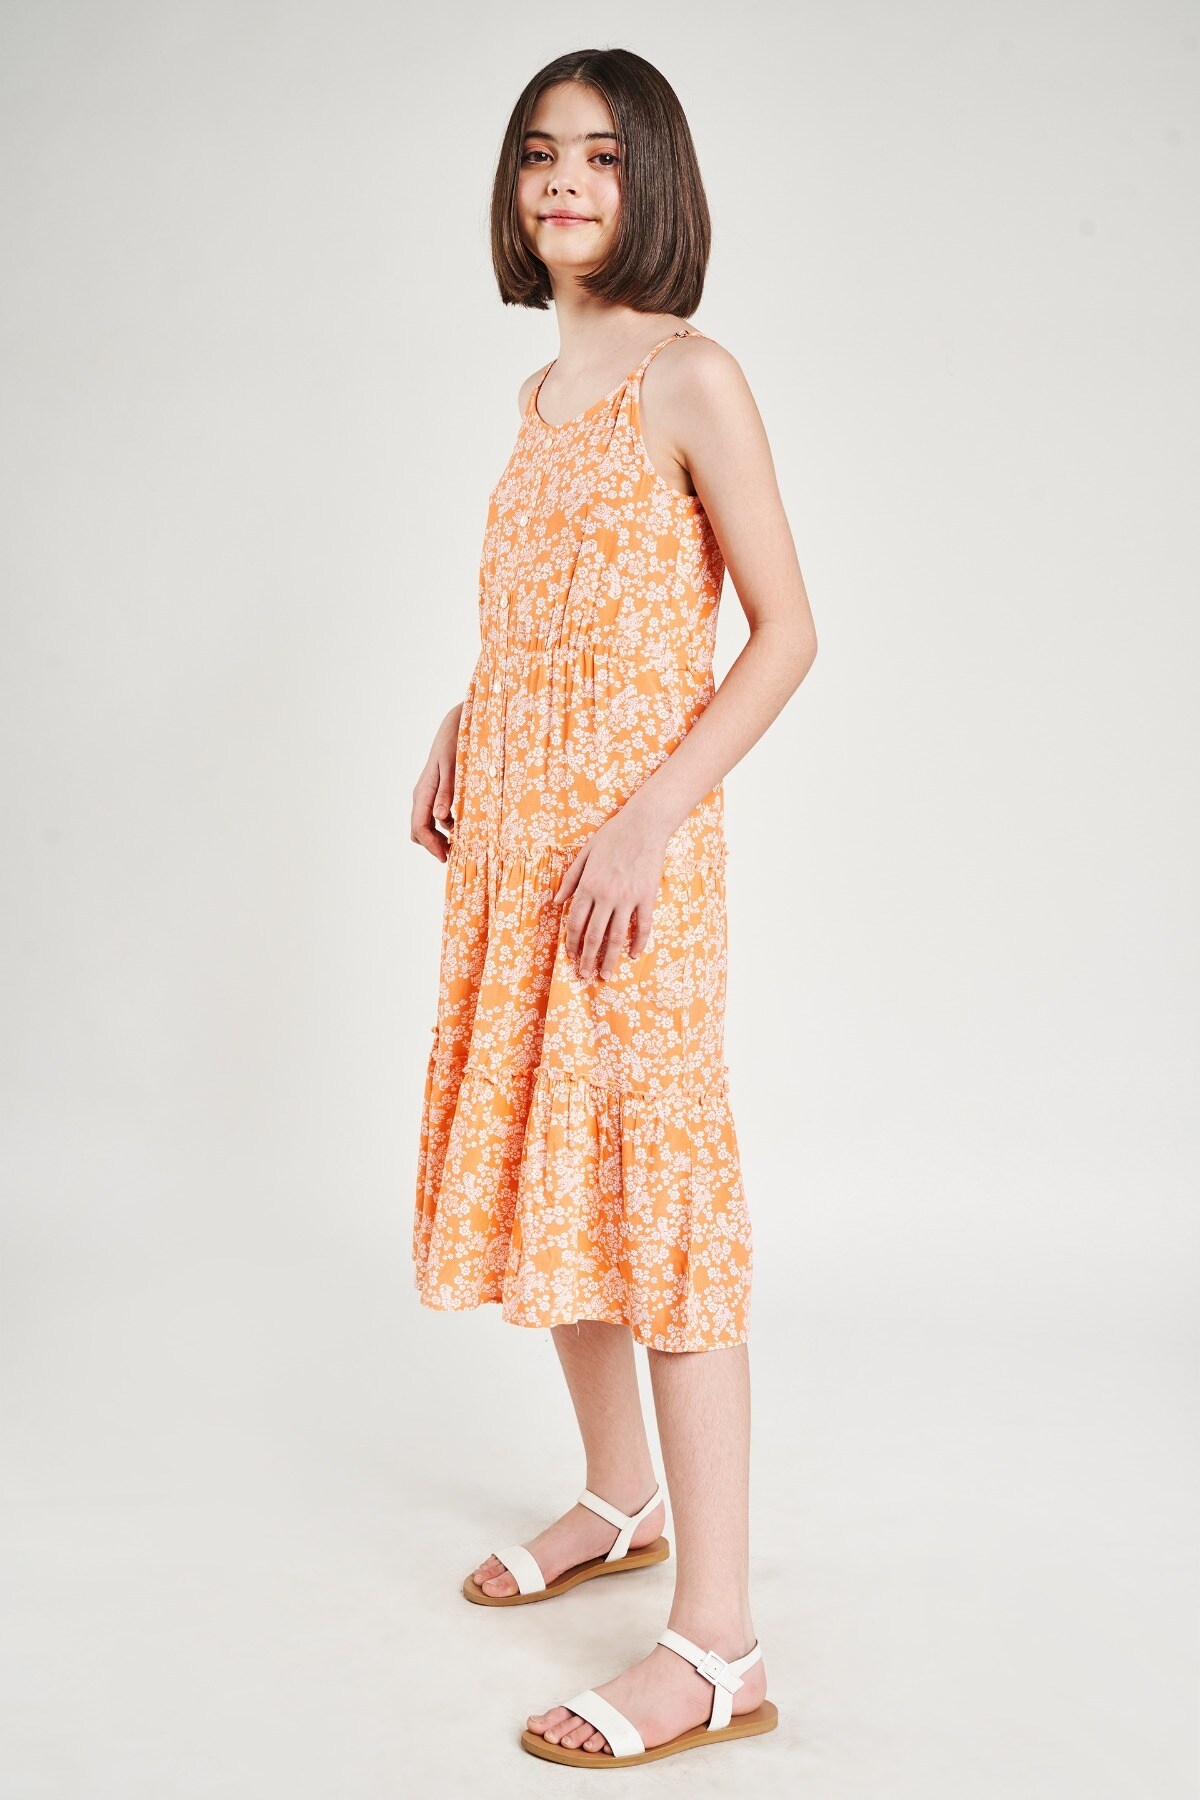 AND | Orange Floral Printed Fit And Flare Dress 2